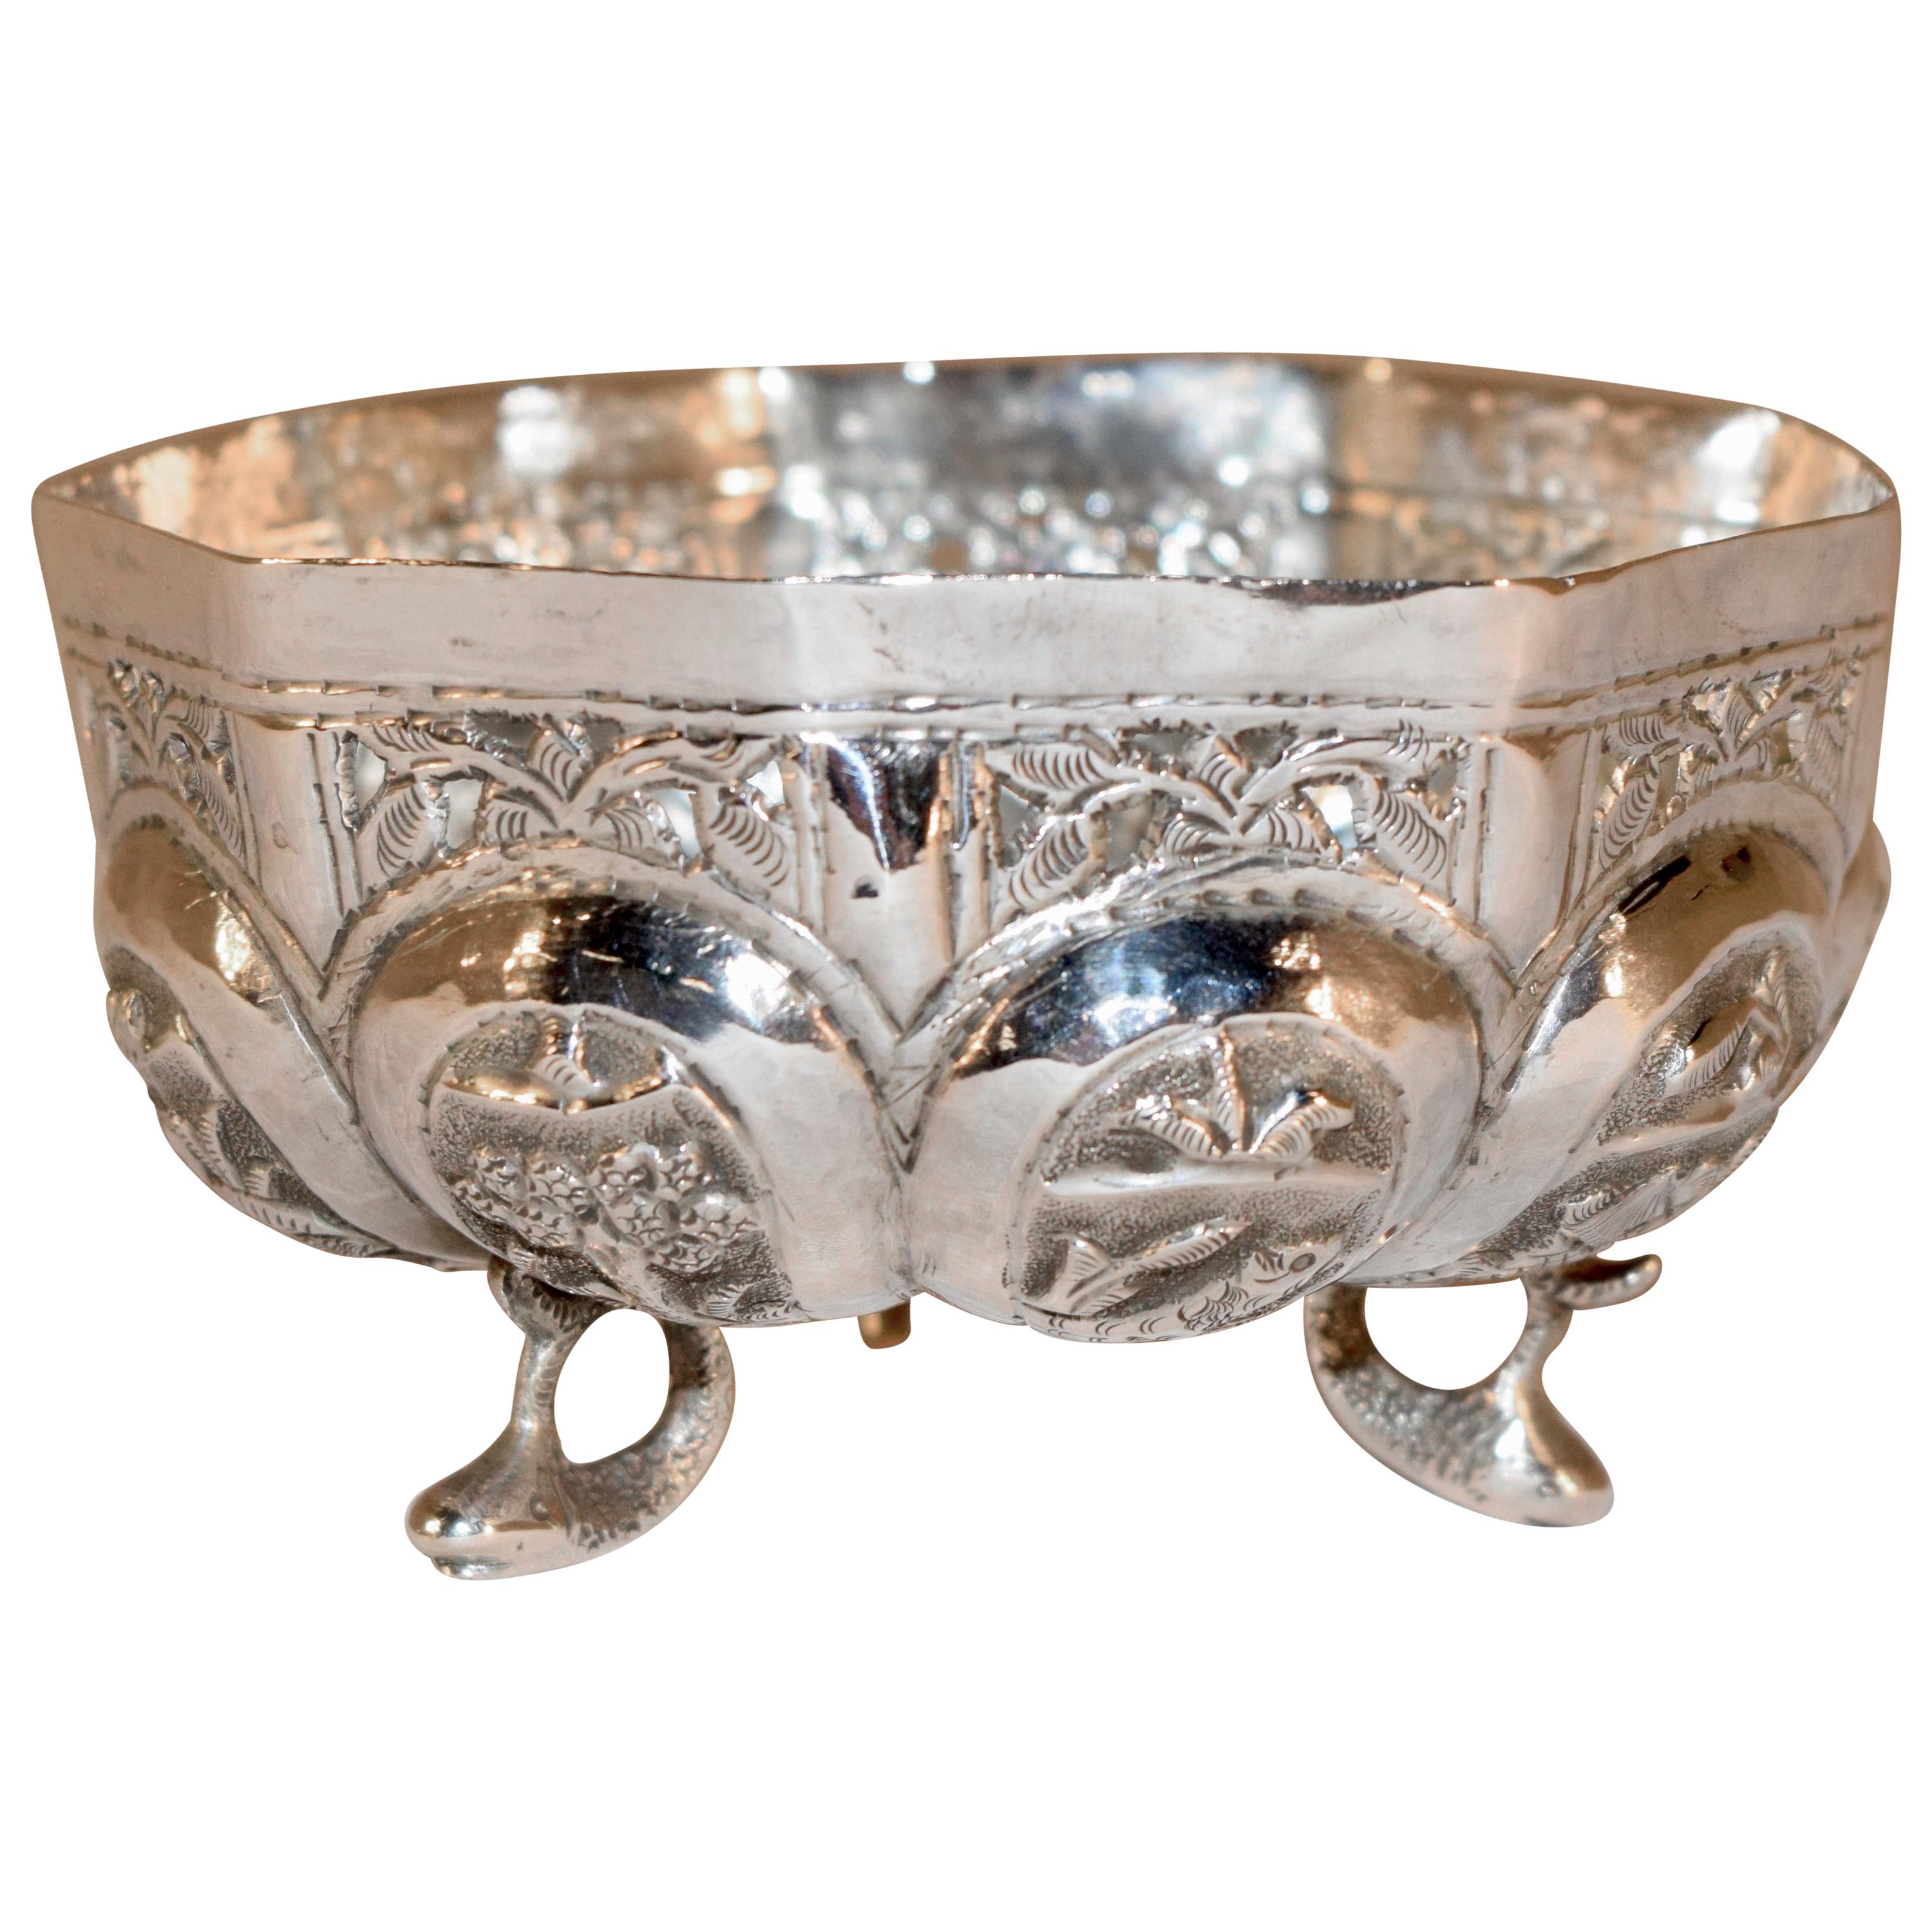 19th Century Anglo-Indian Silver Bowl